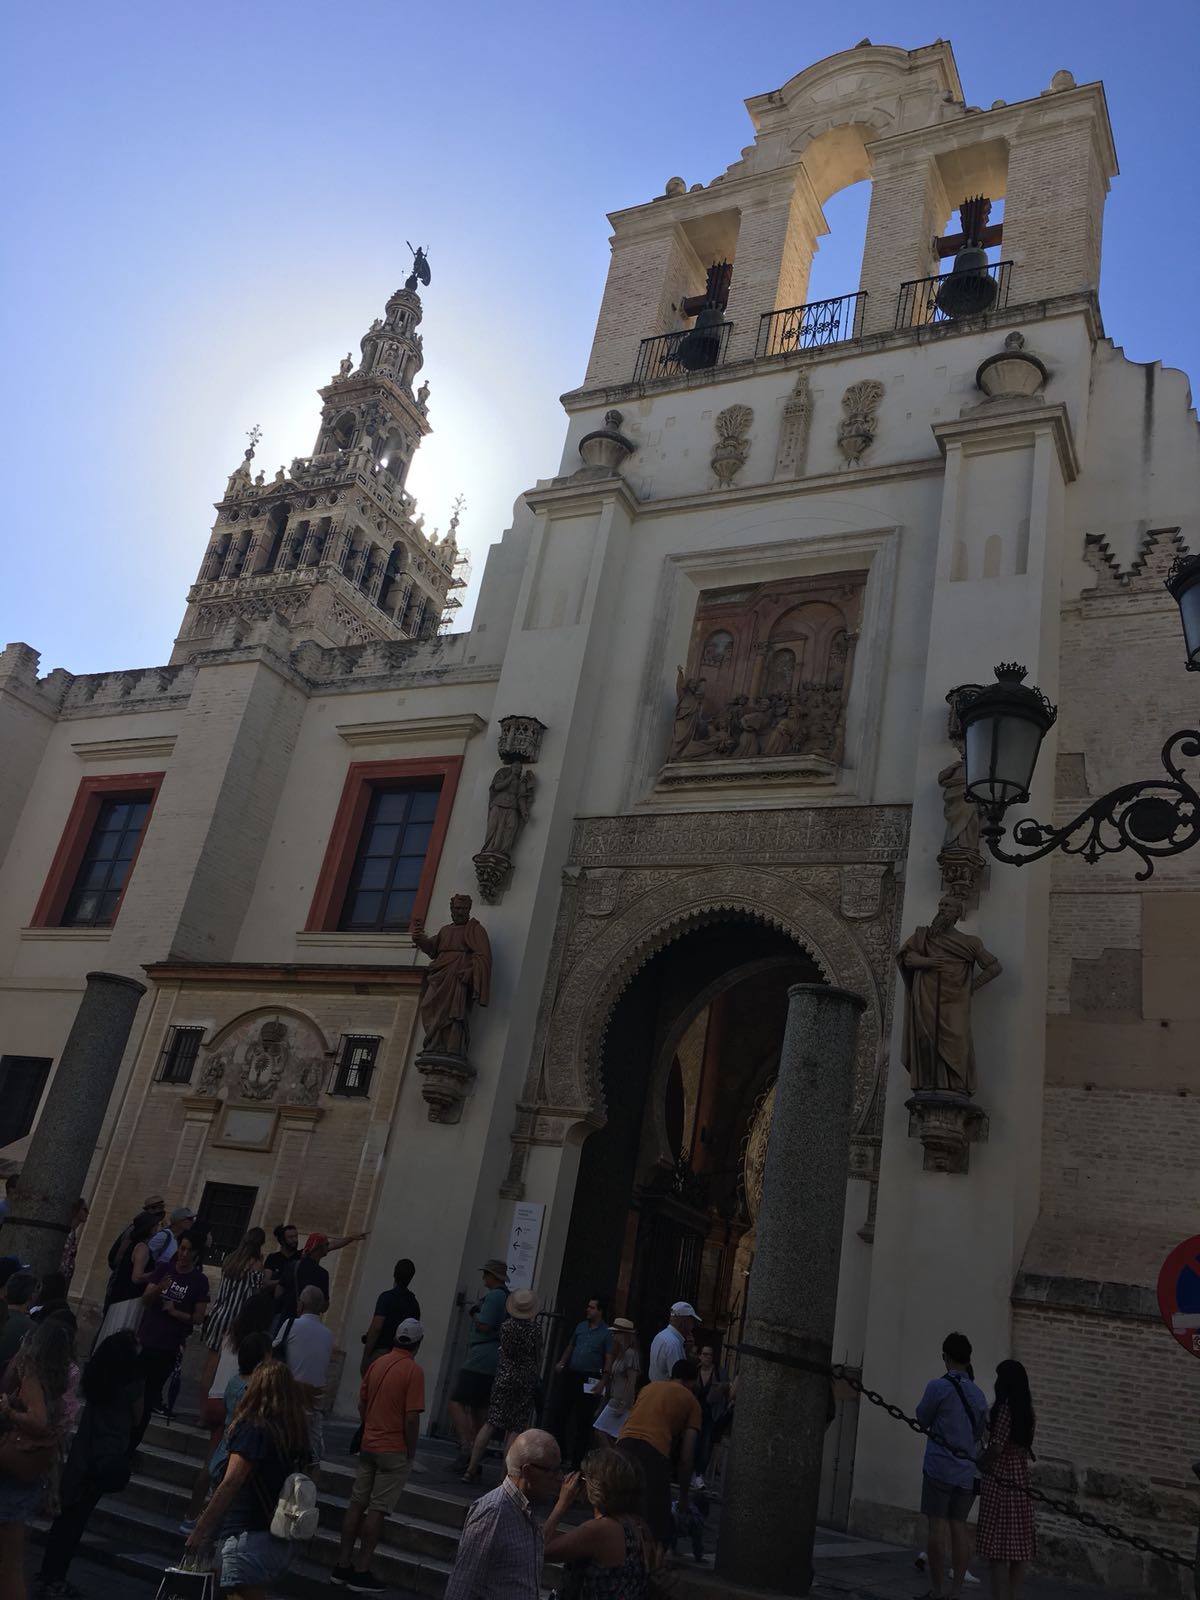 Seville City Break Guide: Things to see and do!